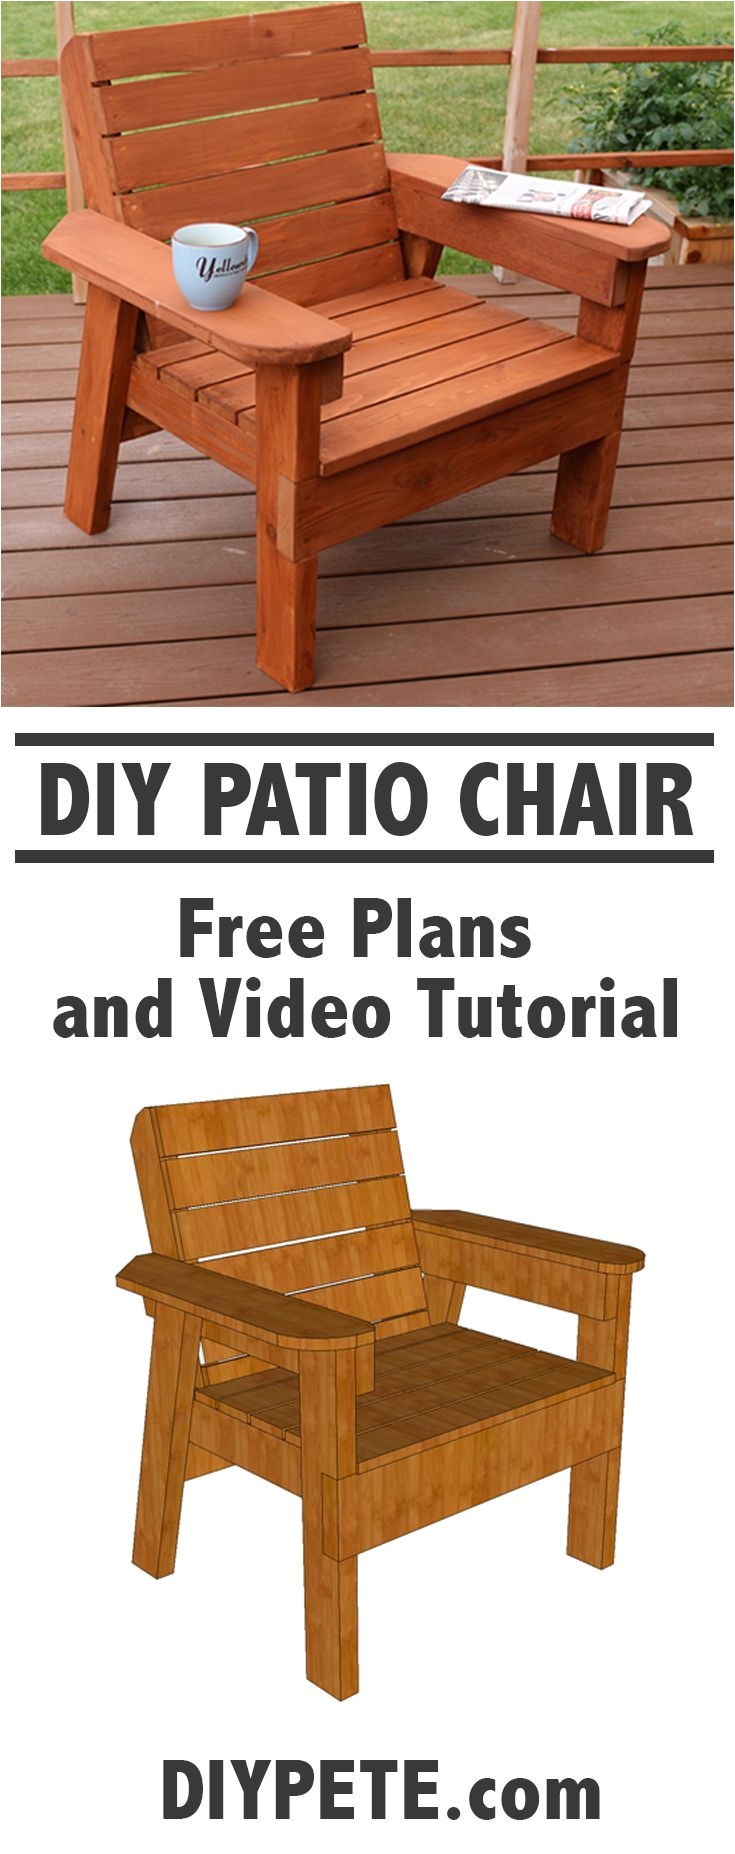 How to Build A Wooden Chair Blueprints Learn How to Build A Patio Chair This is A Fun and Simple Project